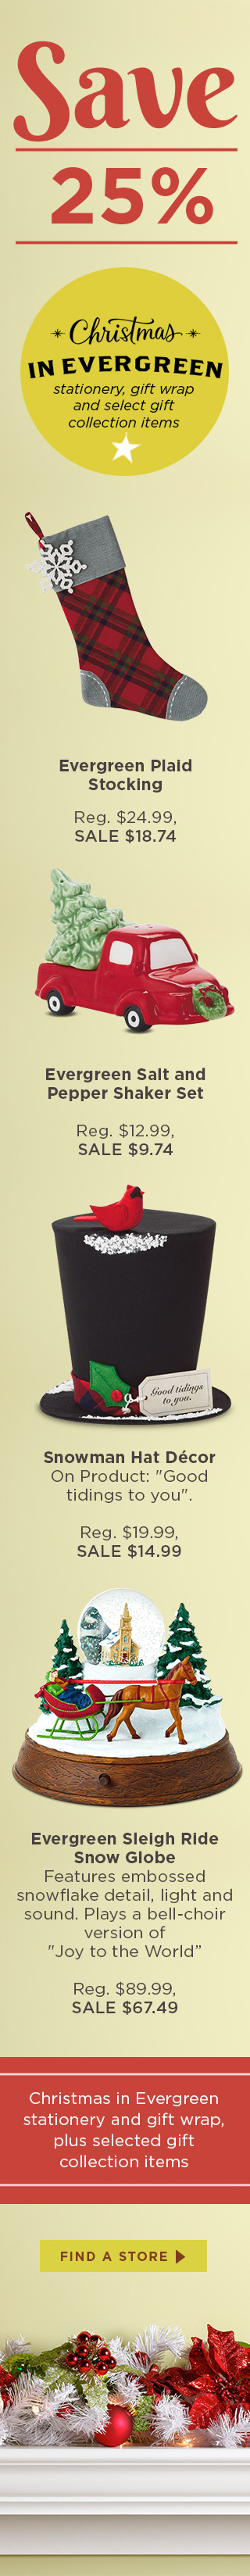 Save 25% OFF. Christmas in Evergreen stationery, gift wrap, and select gift collection items.